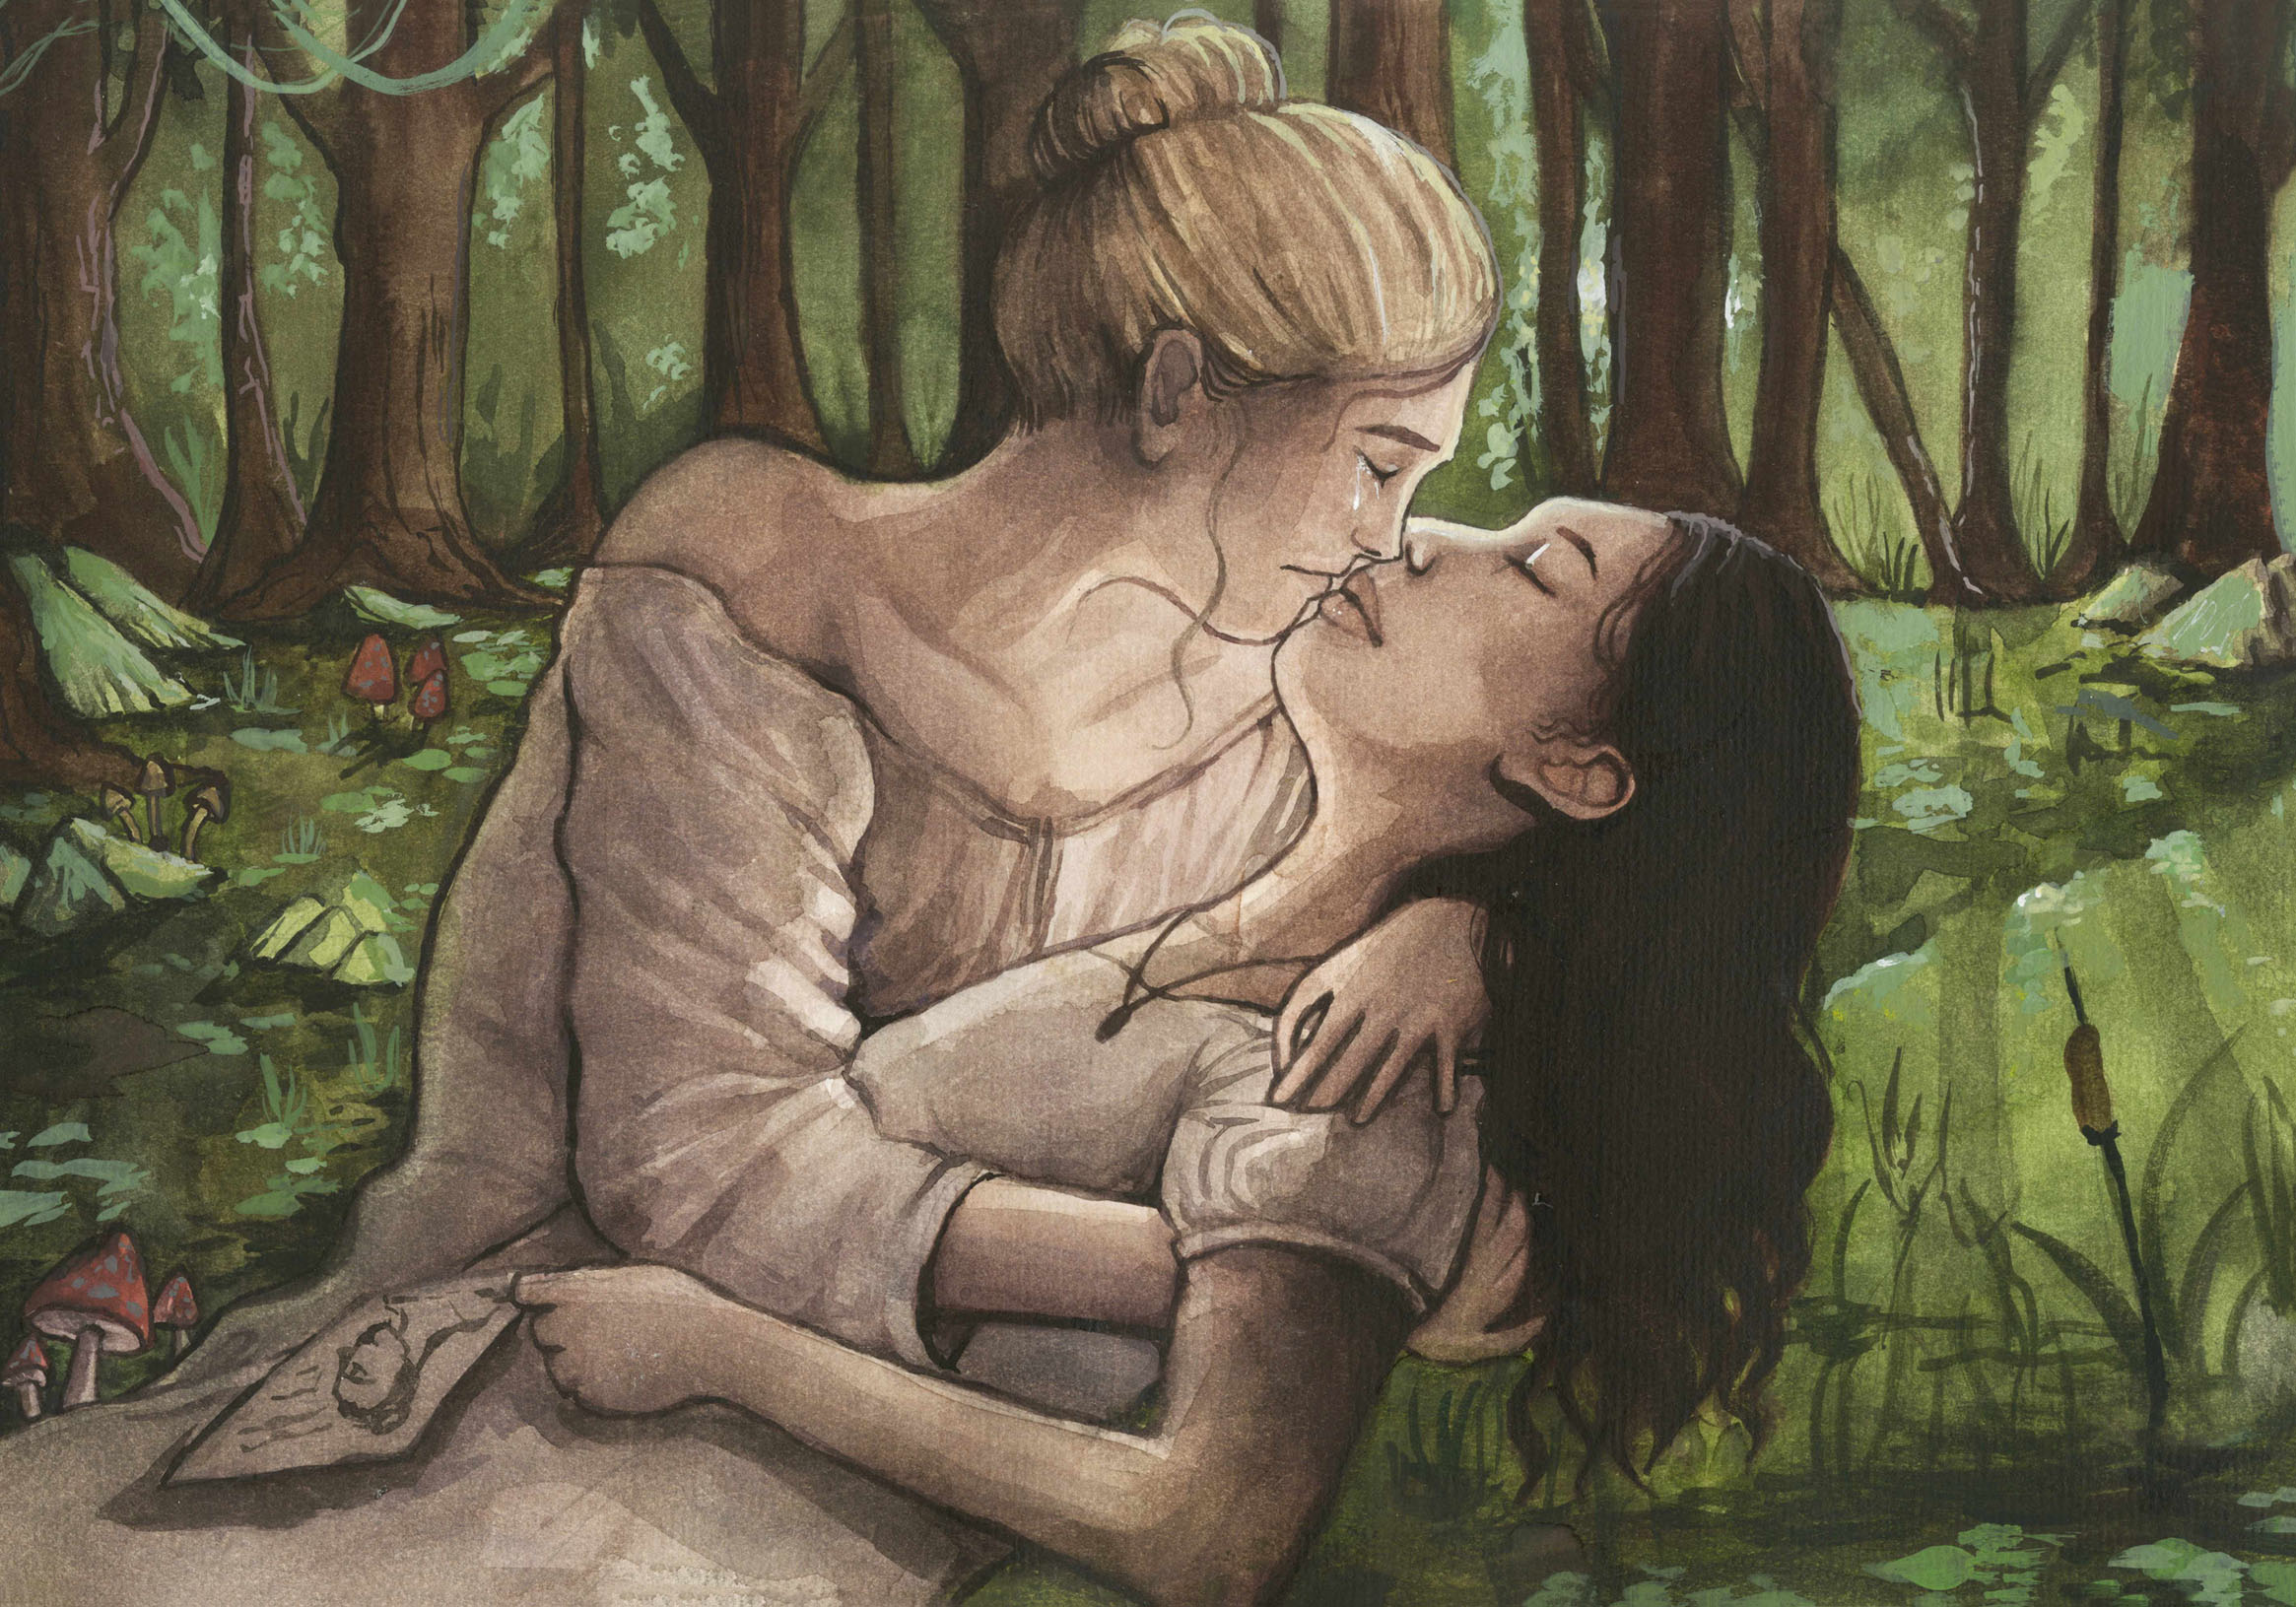 A watercolour painting of two women kissing. They are in the middle of a lush green wood, both wearing 19th century nightdresses.